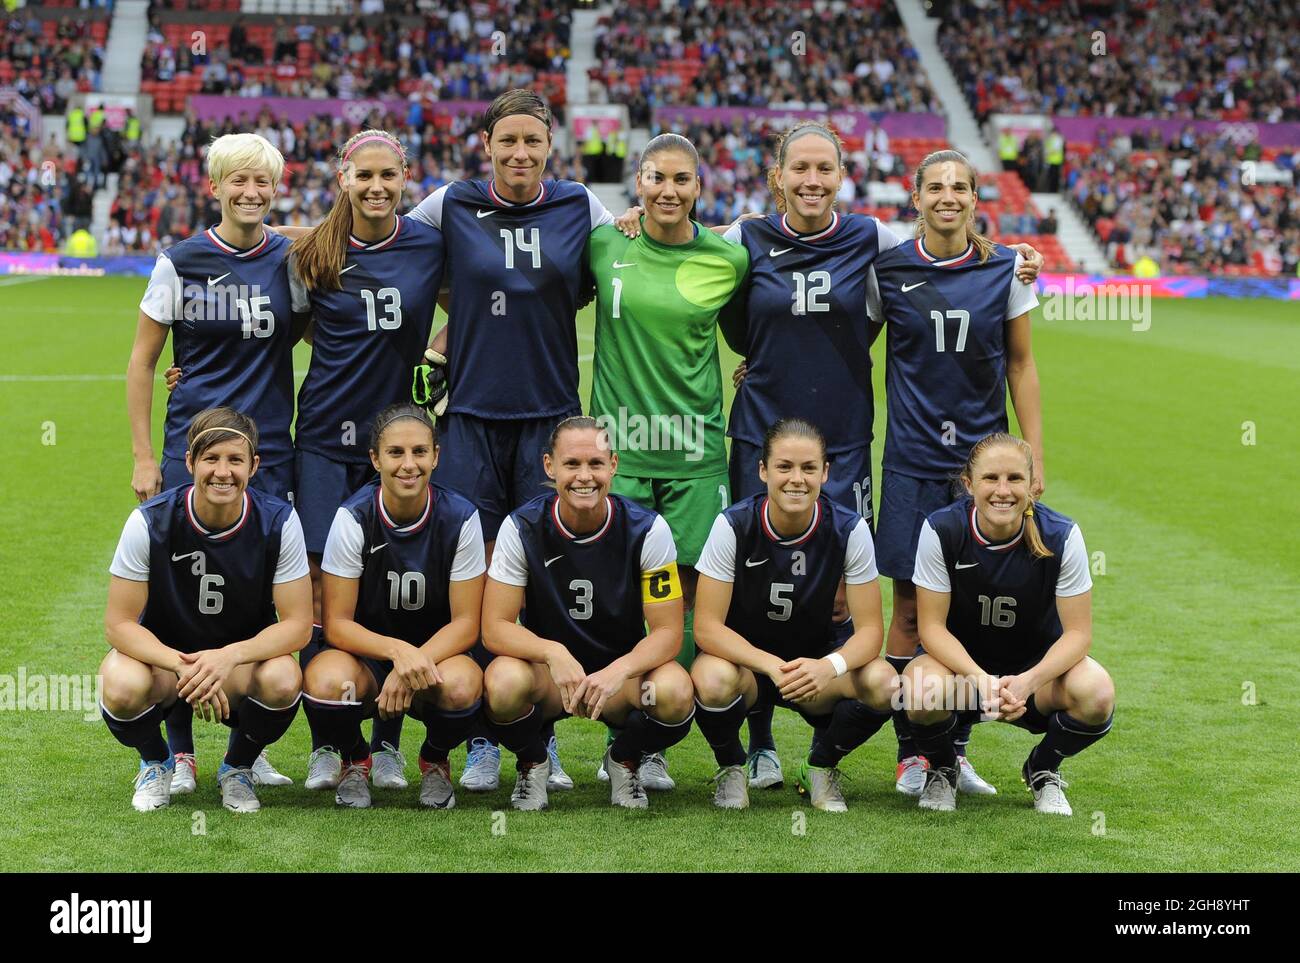 The USA team group.Canada v USA Olympic 2012 semi-final women's match at Old Trafford, Manchester United Kingdom on August 6, 2012. Stock Photo